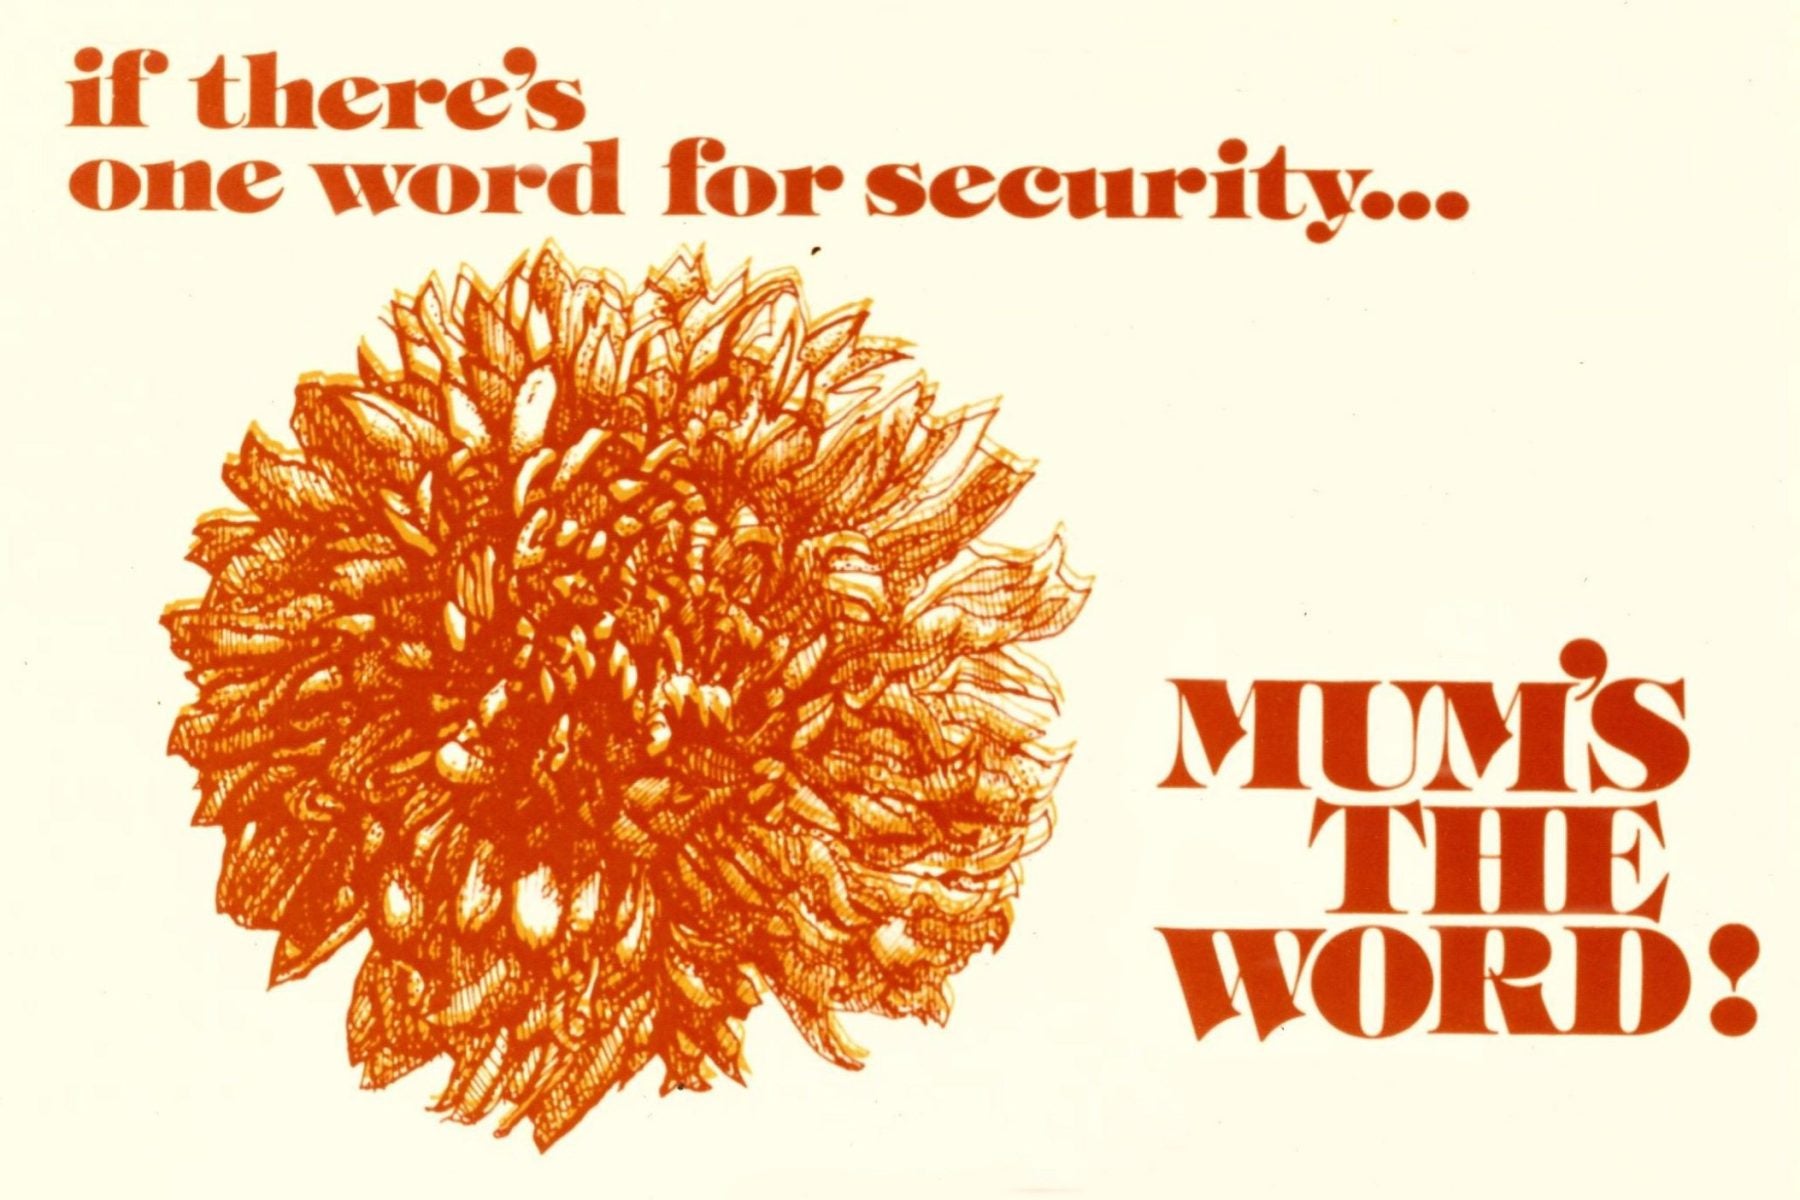 An NSA security posters from the 1950s or 60s